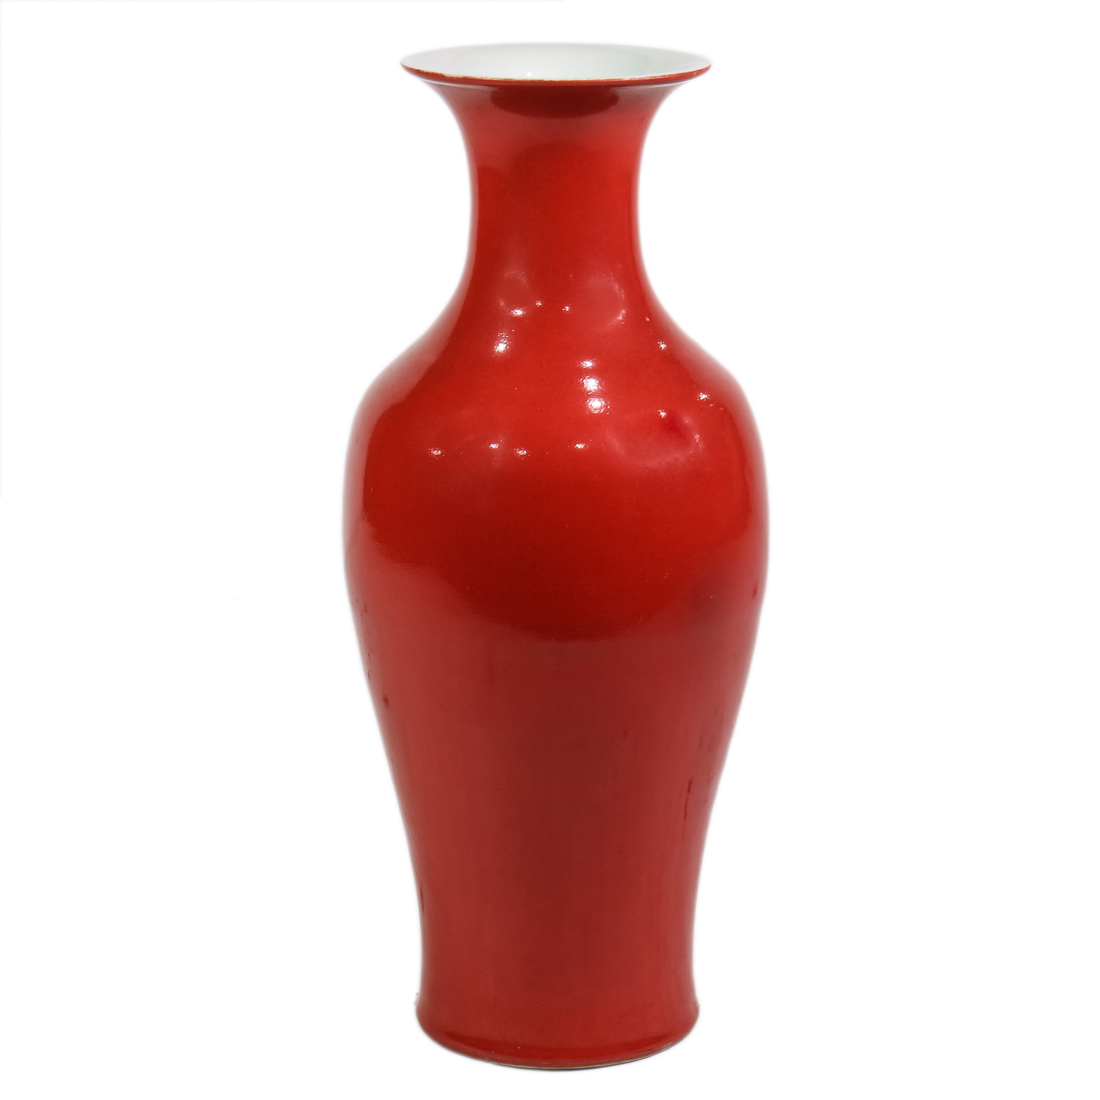 CHINESE CORAL RED GLAZED VASE Chinese 3a250f